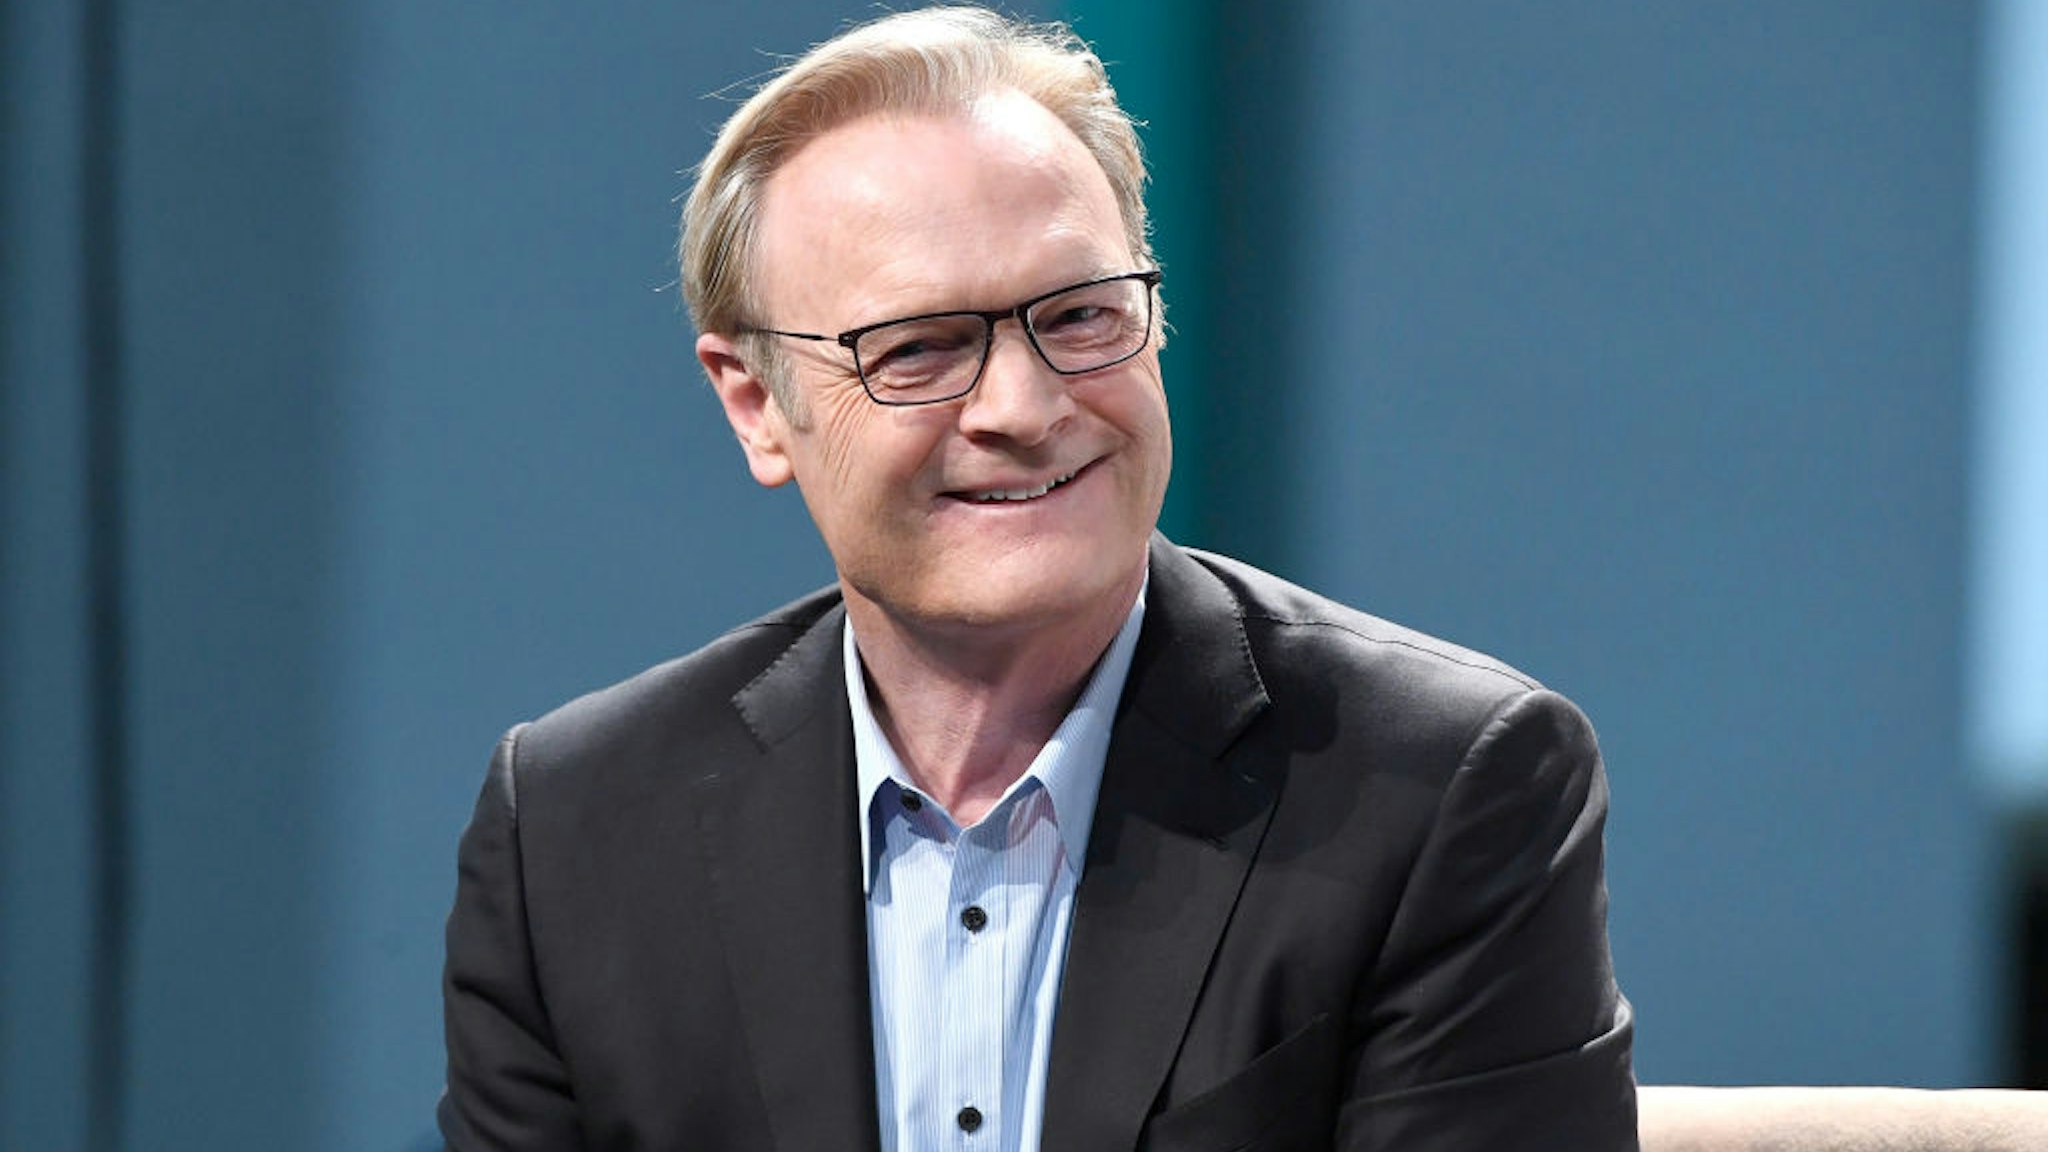 LOS ANGELES, CA - OCTOBER 20: Lawrence O'Donnell speaks onstage at Politicon 2018 at Los Angeles Convention Center on October 20, 2018 in Los Angeles, California. (Photo by Michael S. Schwartz/Getty Images)